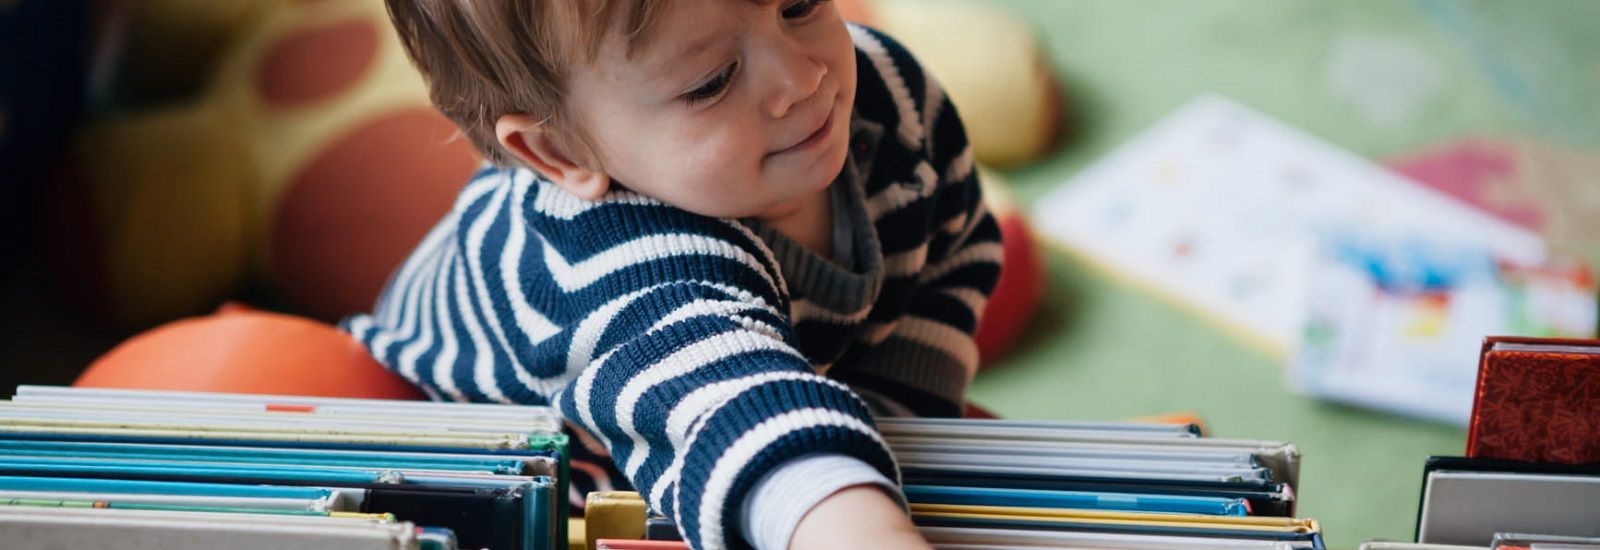 Baby crawling on books banner image